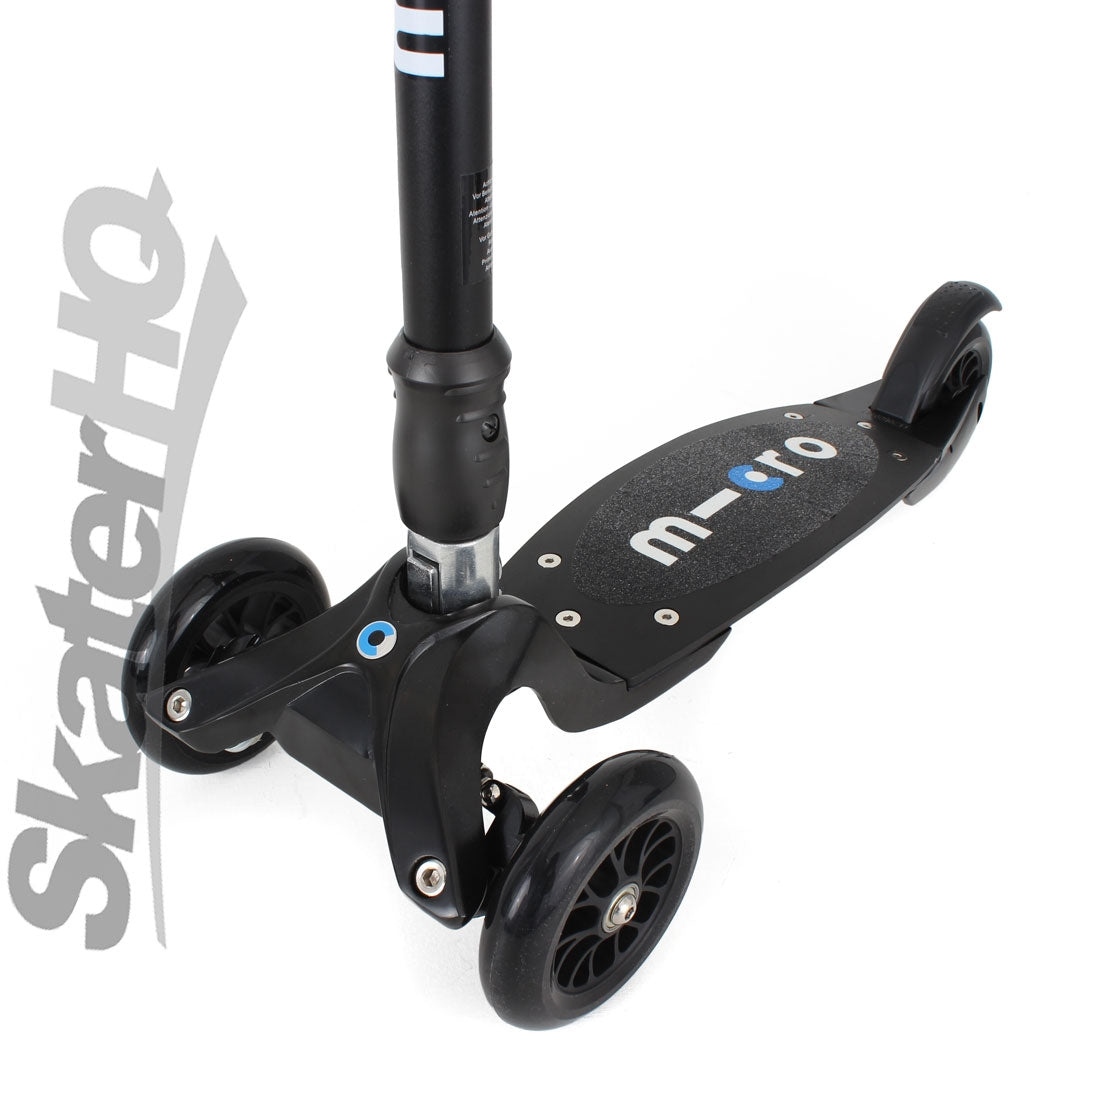 Micro Kickboard Compact J/T - Black Scooter Completes Rec